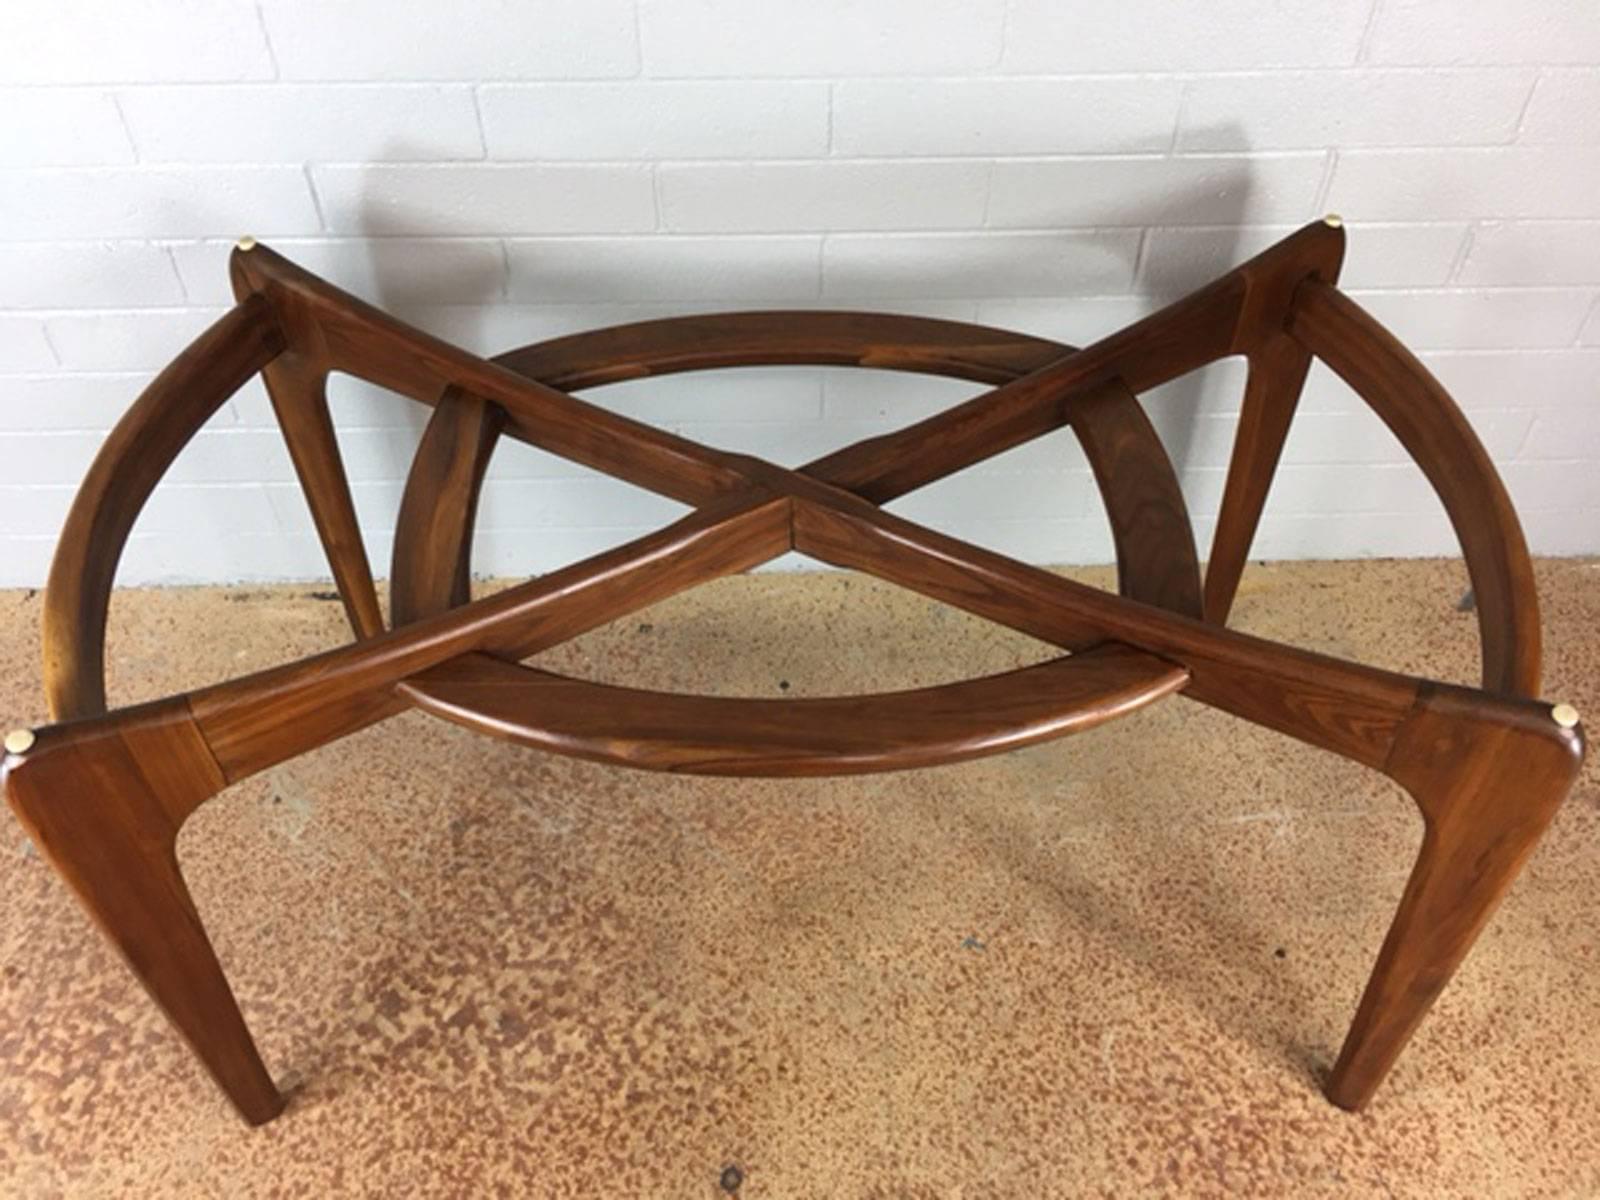 Adrian Pearsall large sculptural walnut dining table manufactured by Craft Associates. The walnut utilized within this 50+ ear old masterpiece is in excellent vintage condition. Rich and warm.